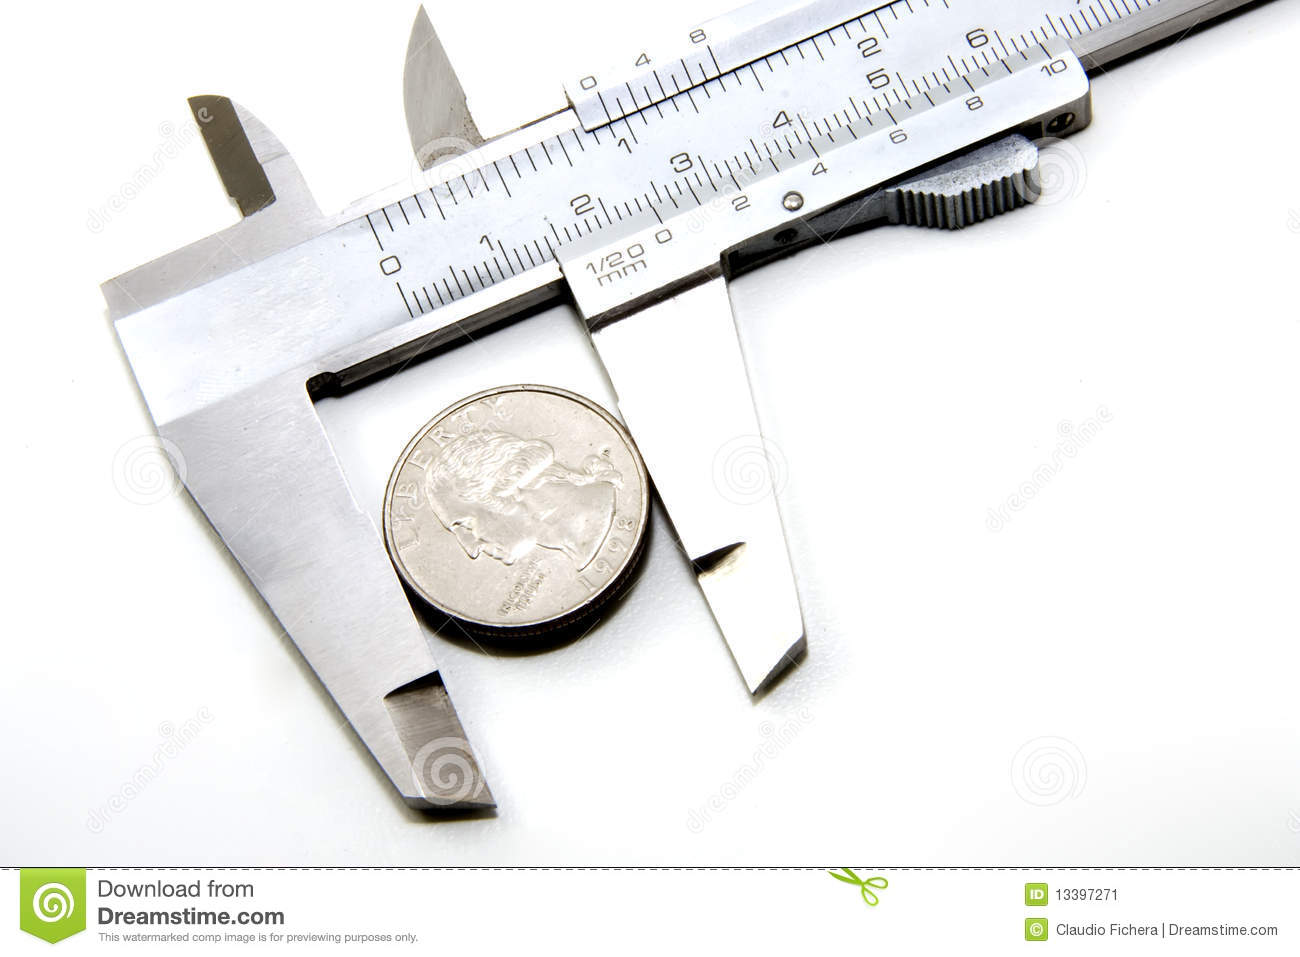 25 Cents In A Caliper  The Concept Of The Value Of 25 Cents